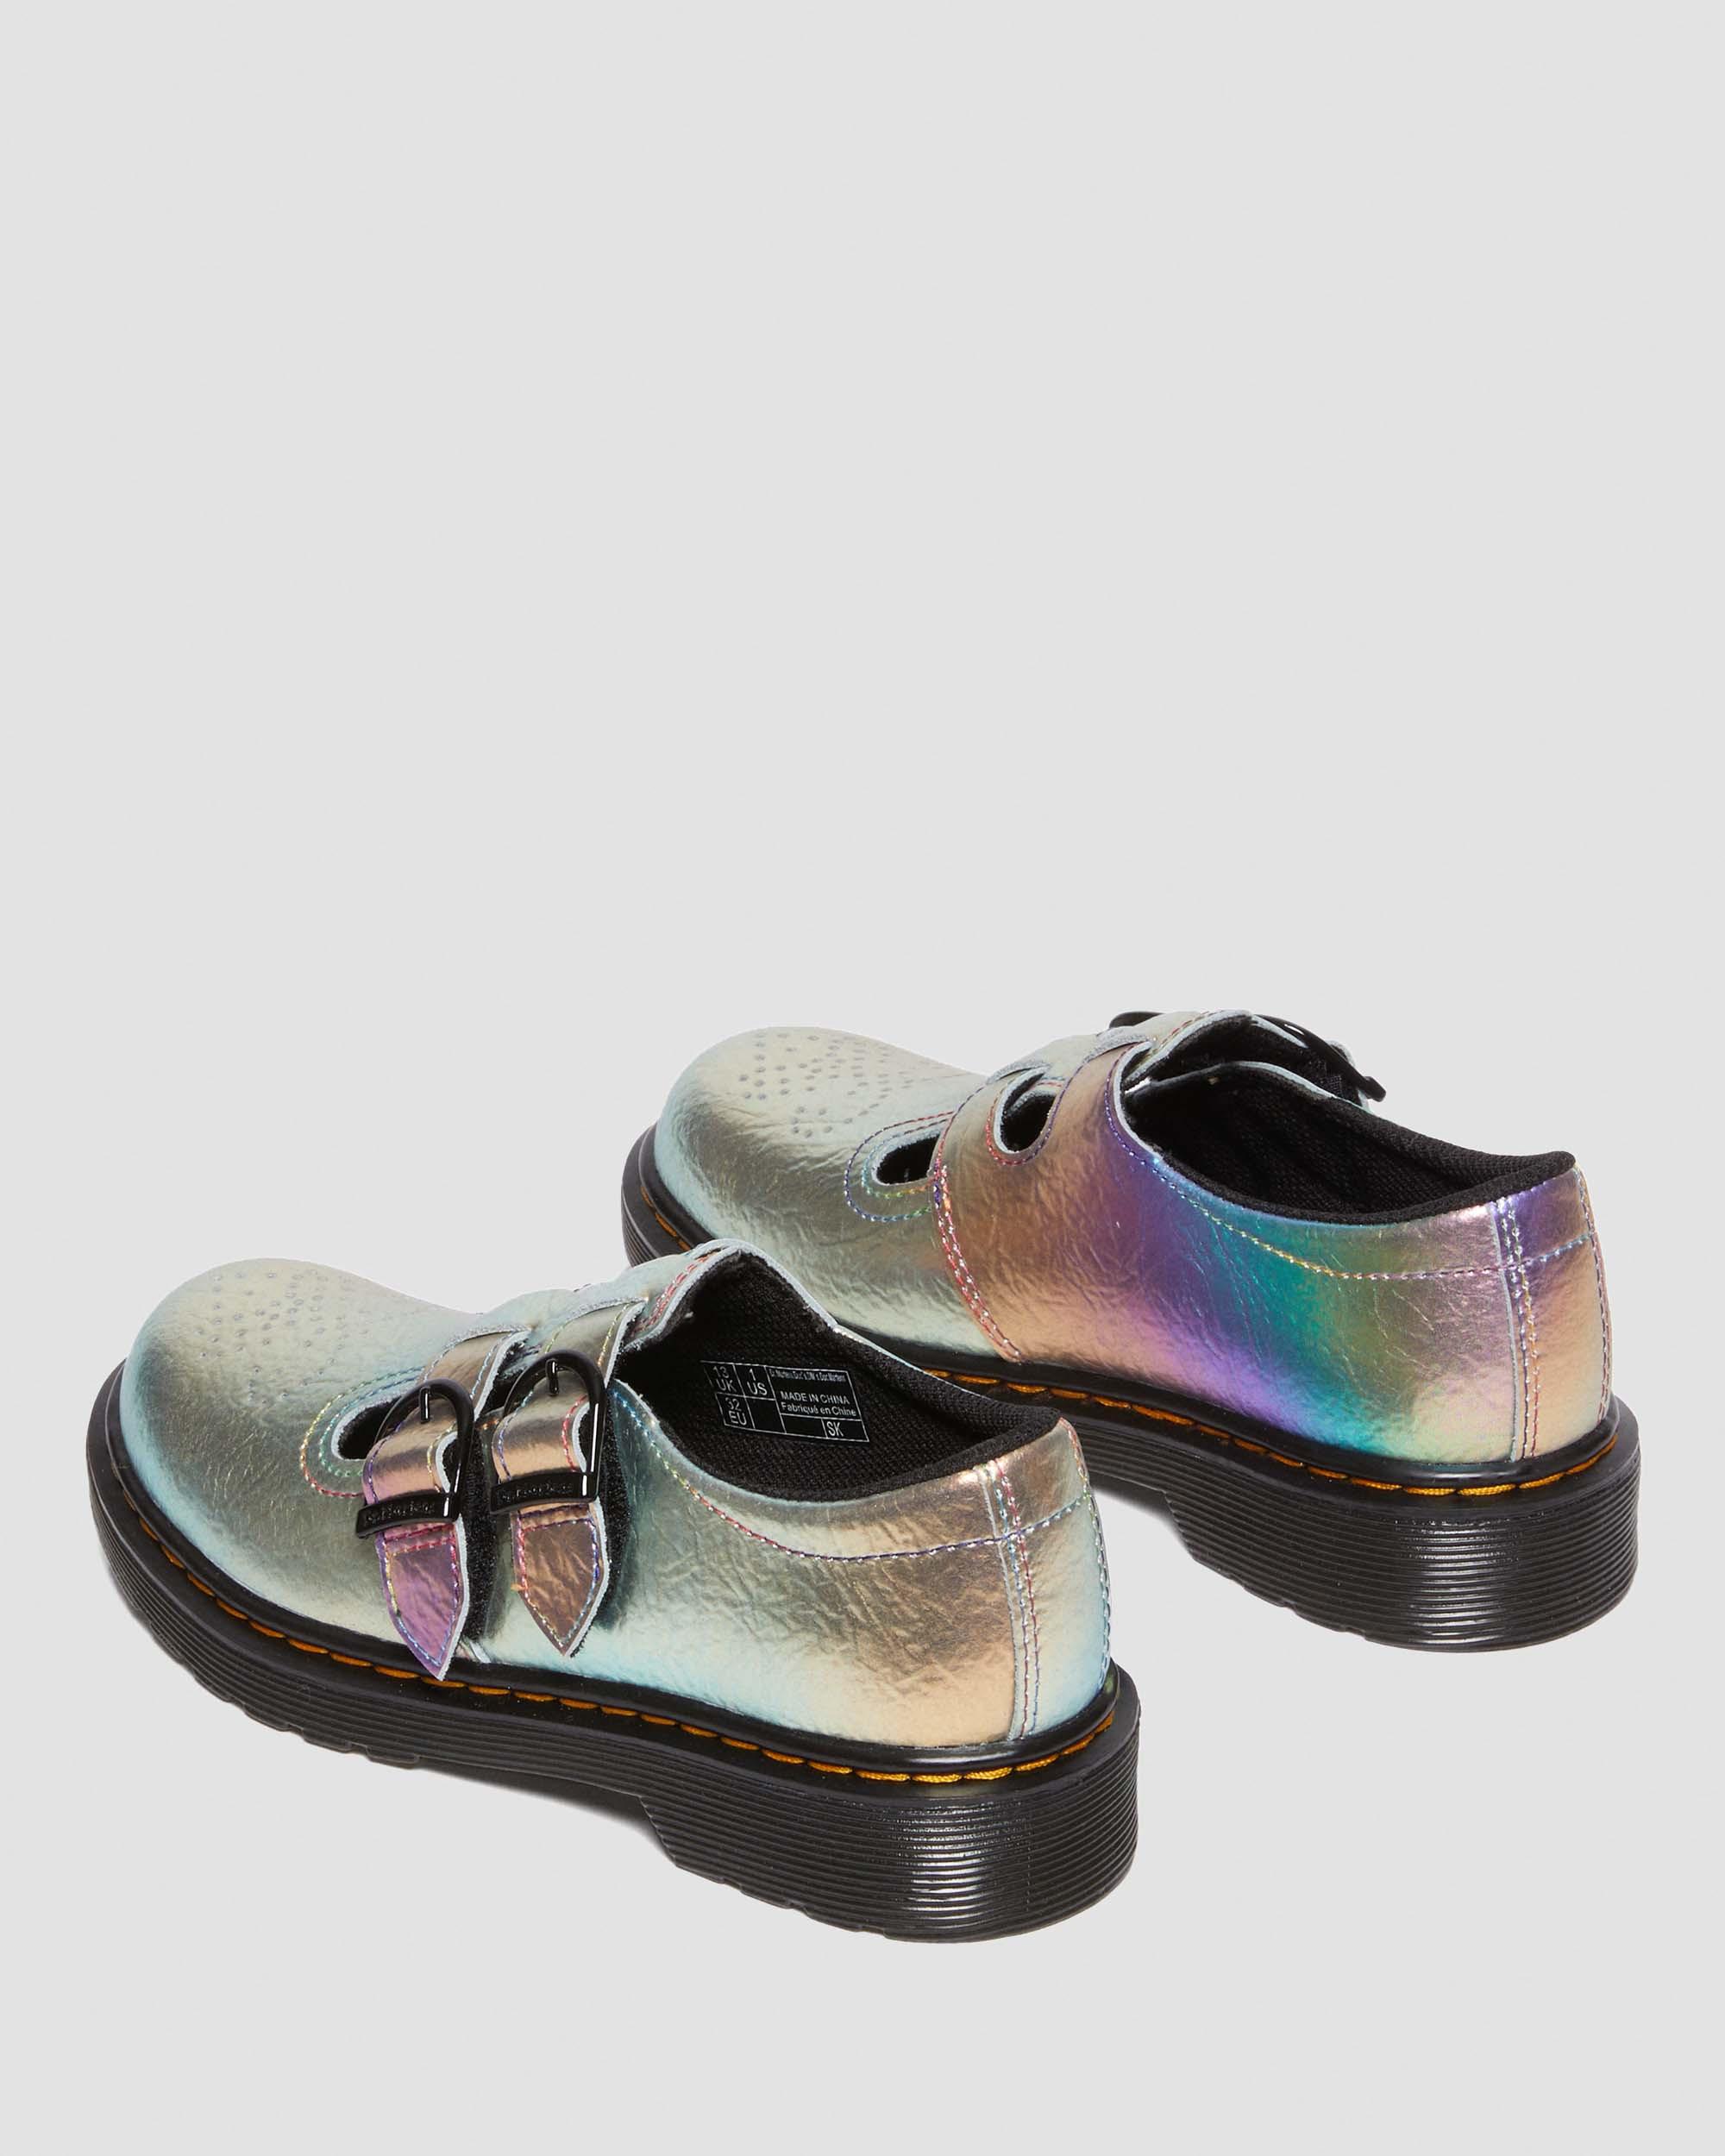 Junior 8065 Rainbow Crinkle Leather Mary Jane Shoes in MULTI